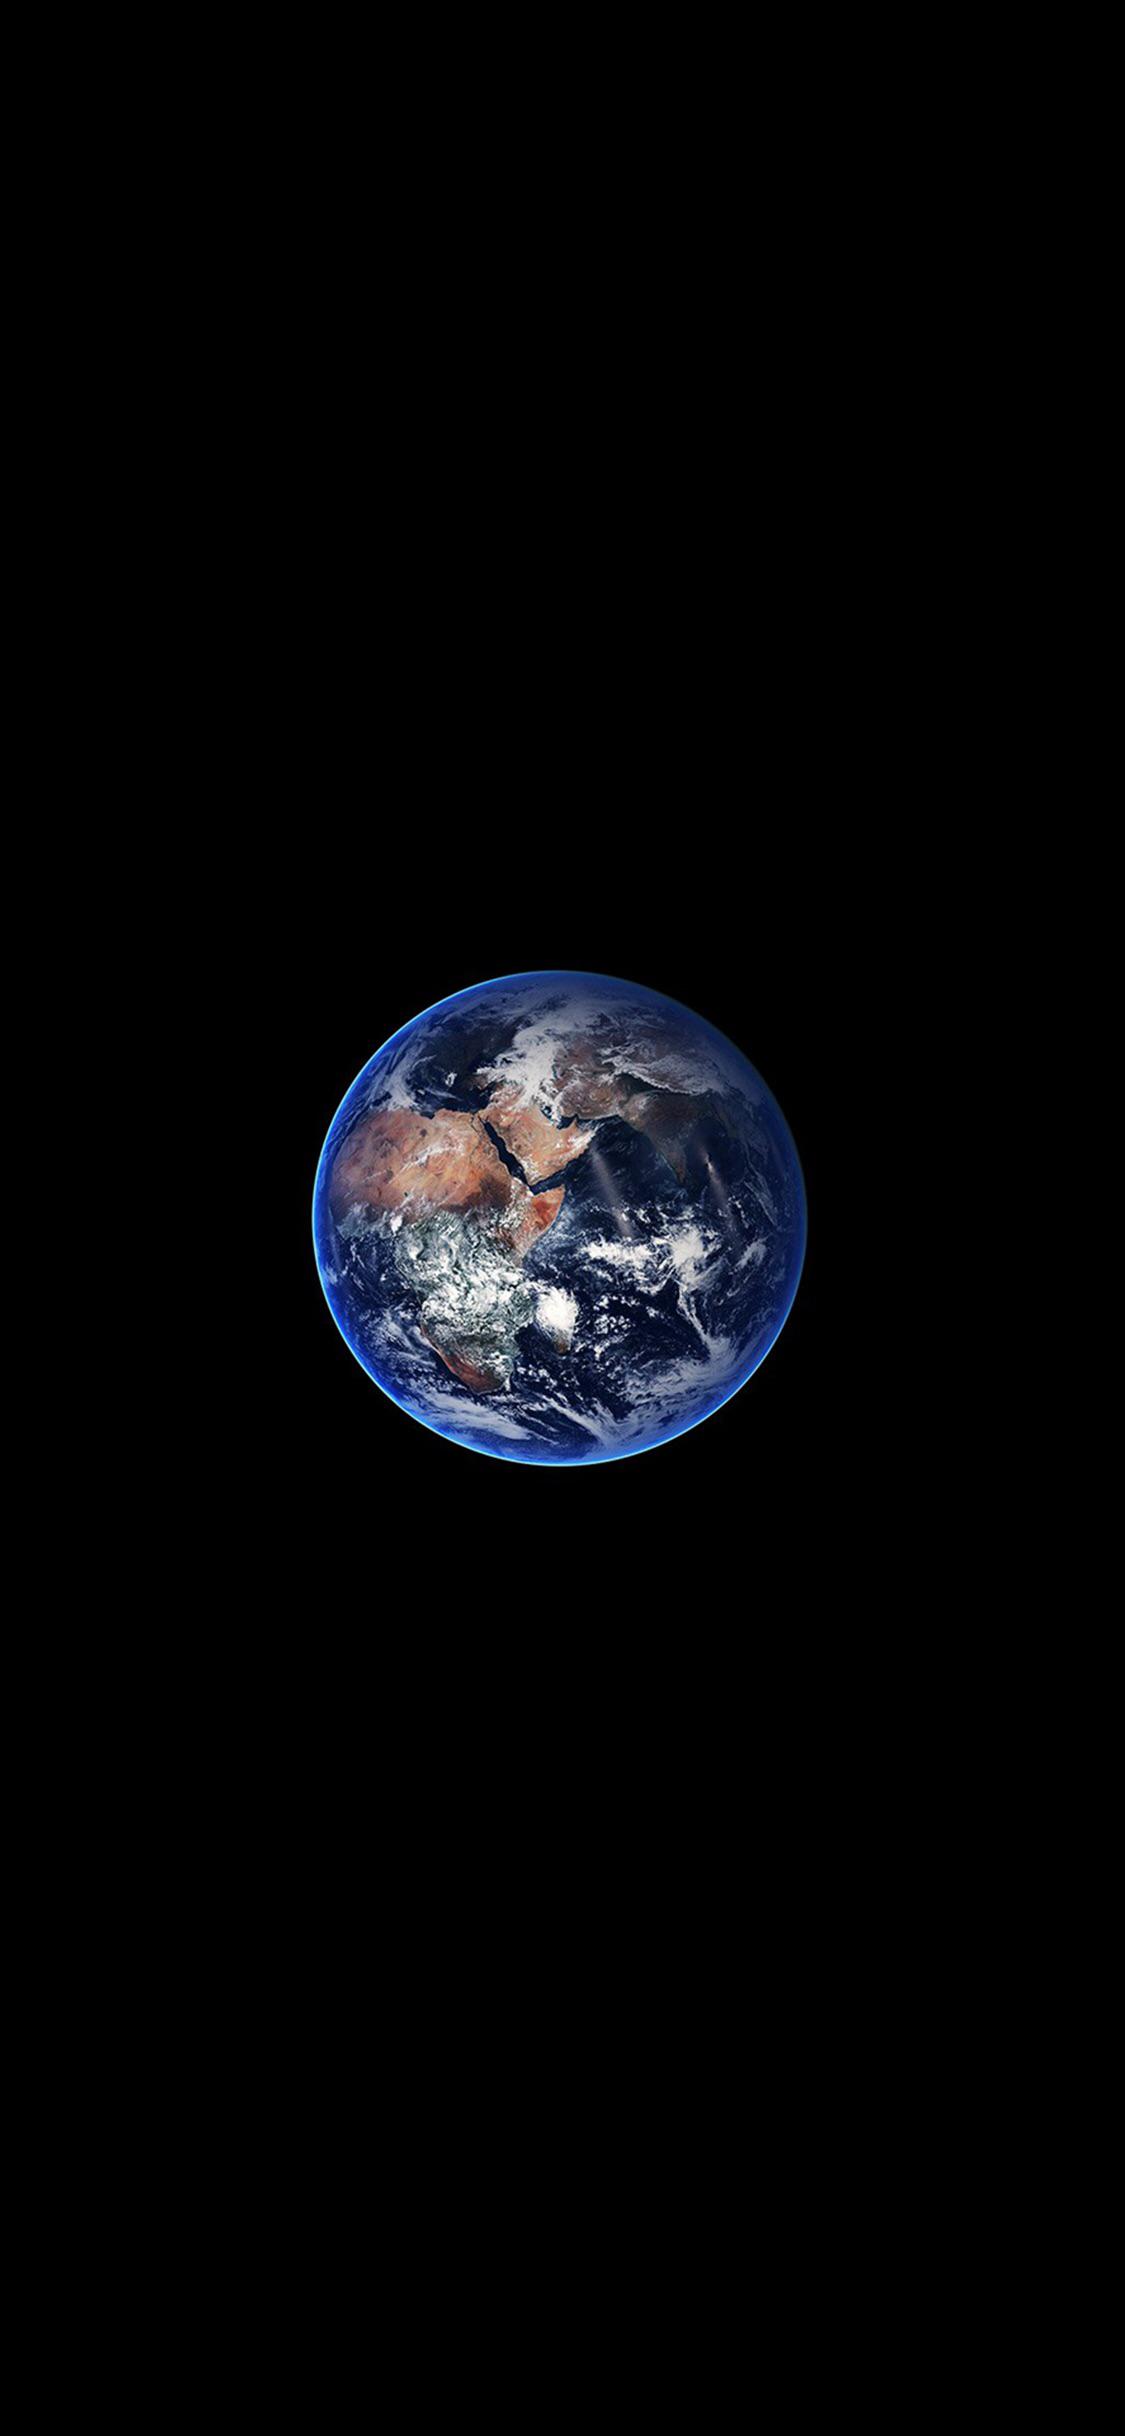 Earth Amoled Wallpaper for iPhone: iphonewallpaper